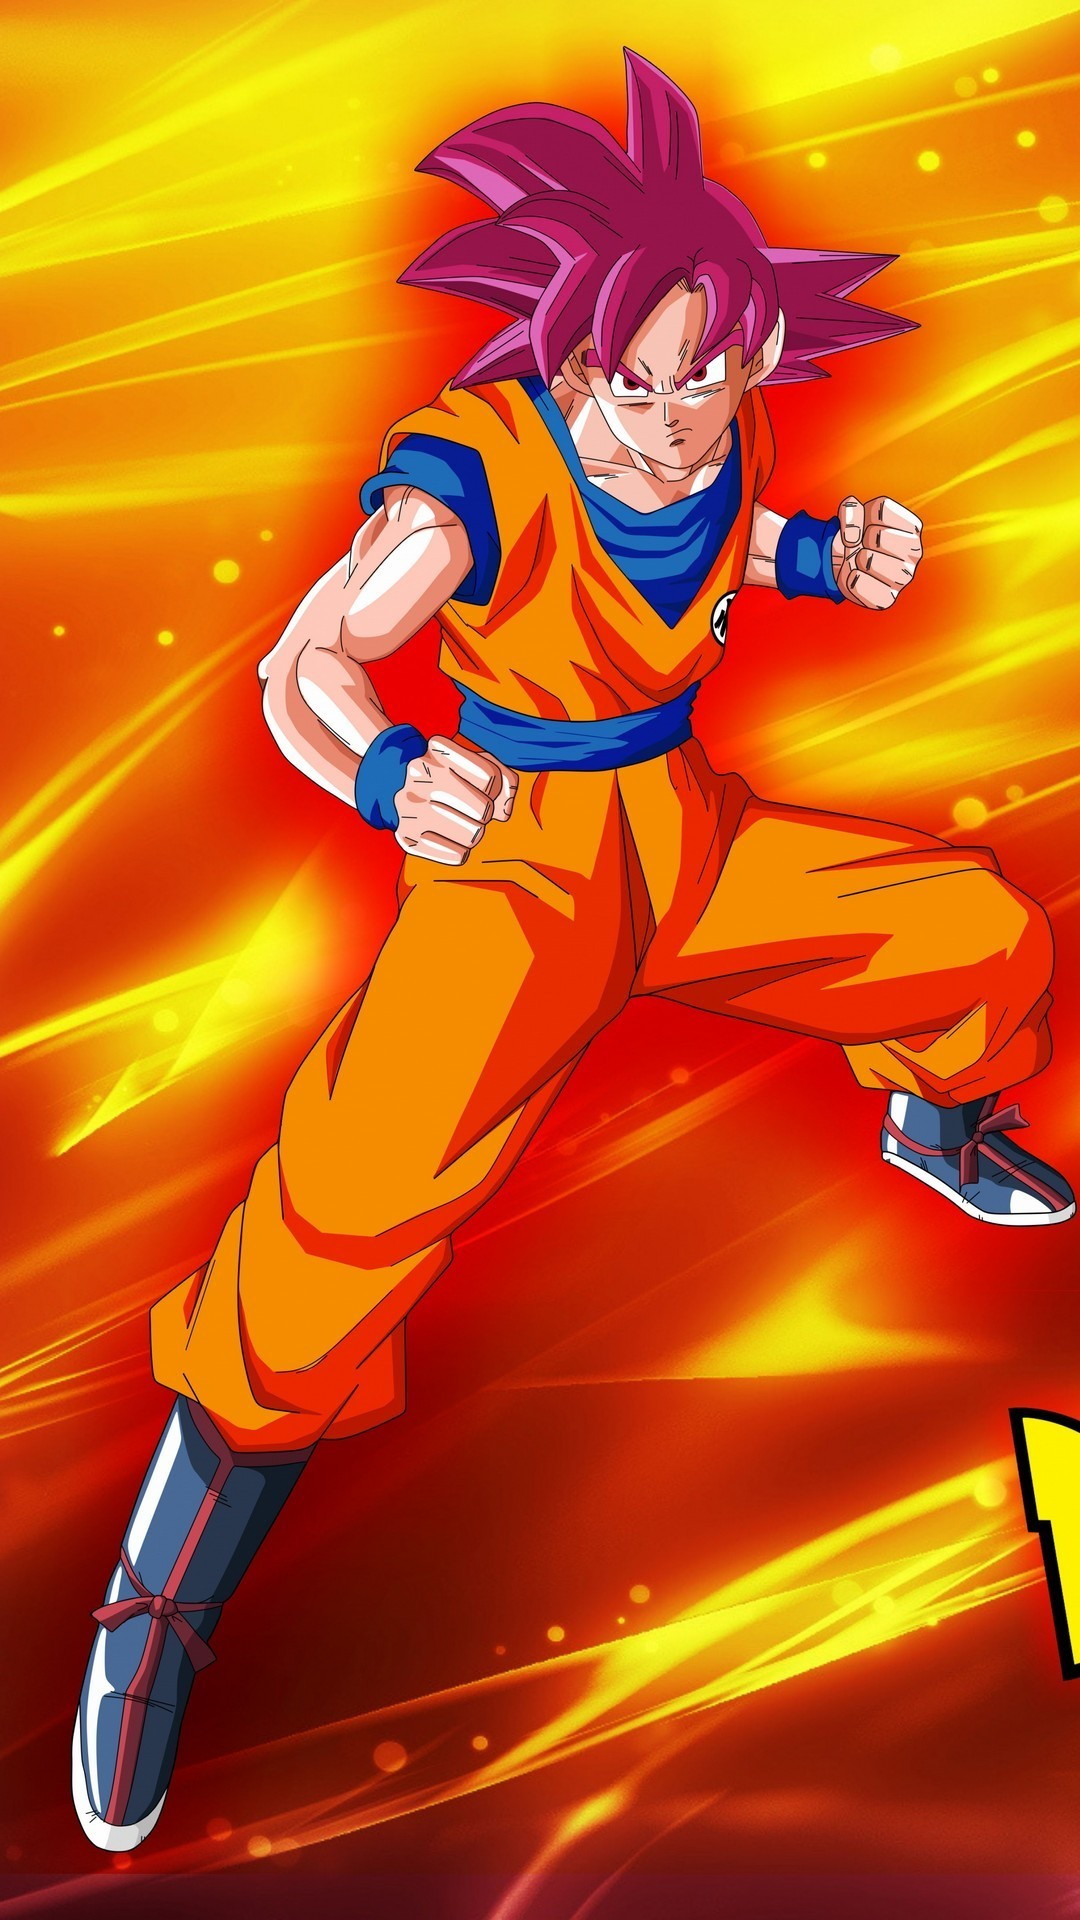 Goku Super Saiyan God Wallpaper iPhone with high-resolution 1080x1920 pixel. You can use and set as wallpaper for Notebook Screensavers, Mac Wallpapers, Mobile Home Screen, iPhone or Android Phones Lock Screen